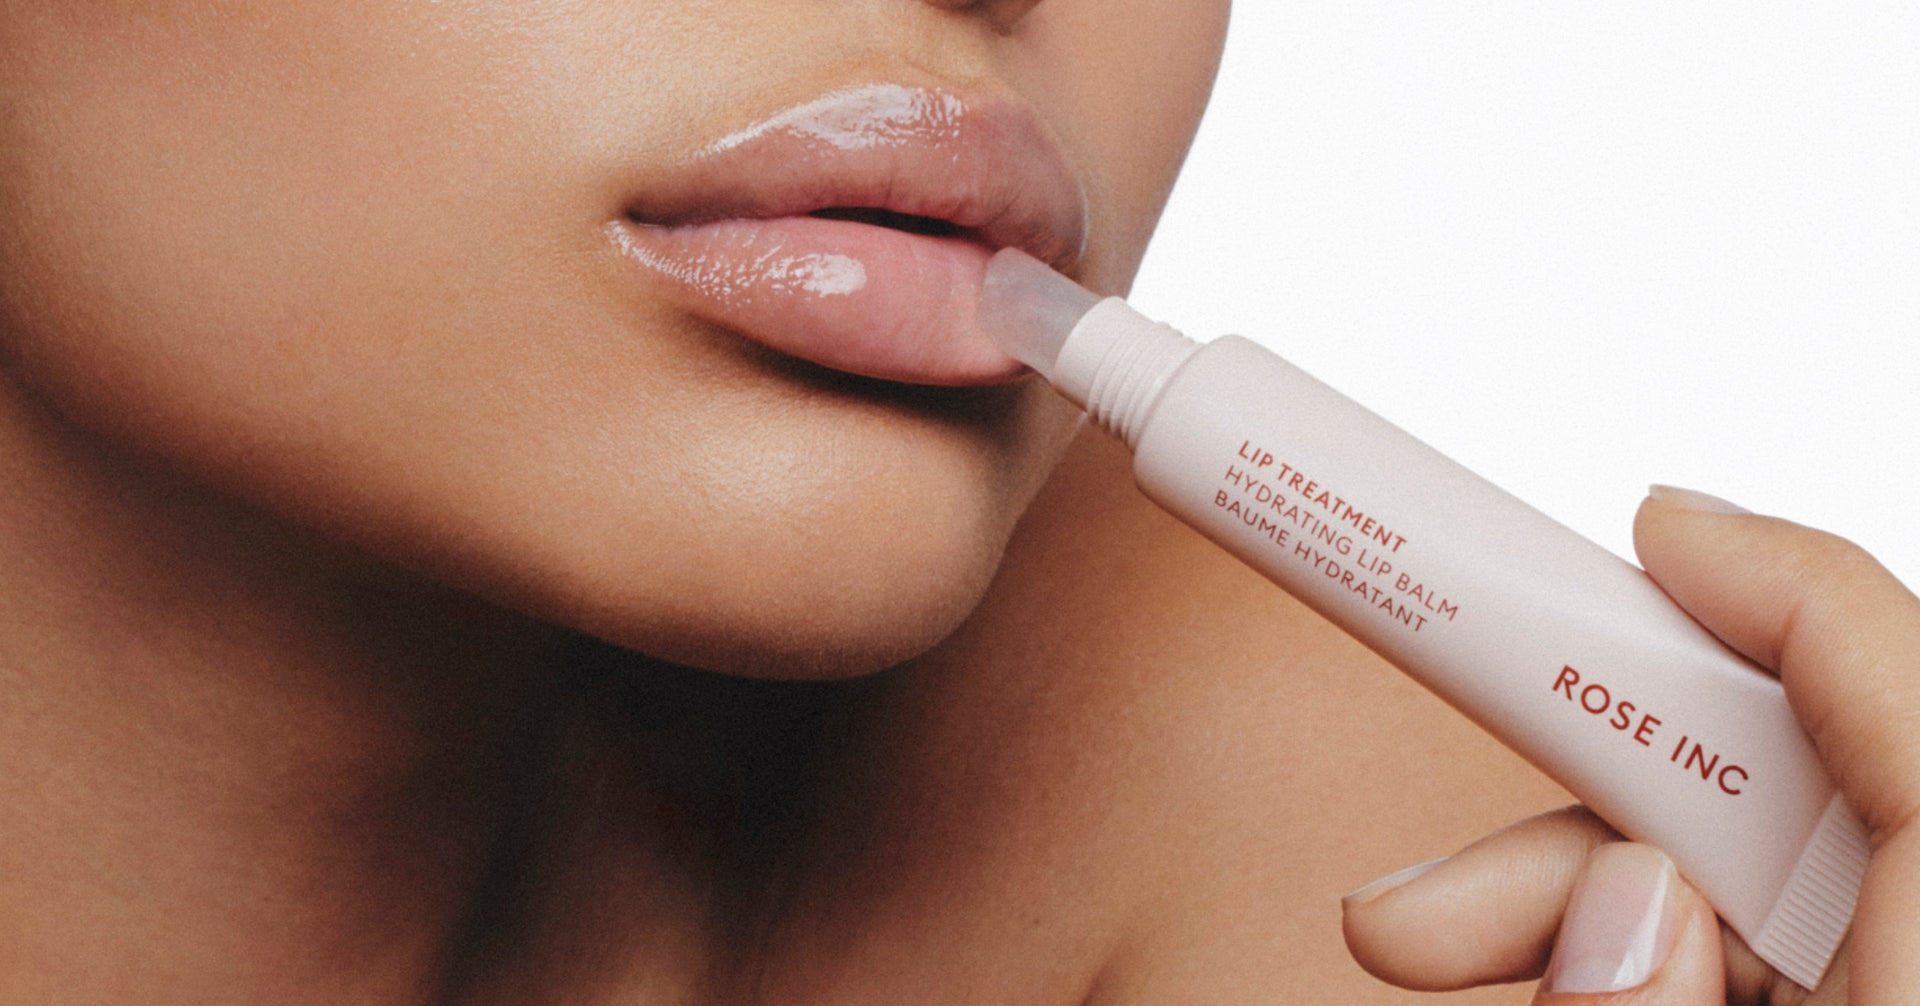 How To Heal Chapped Lips Overnight